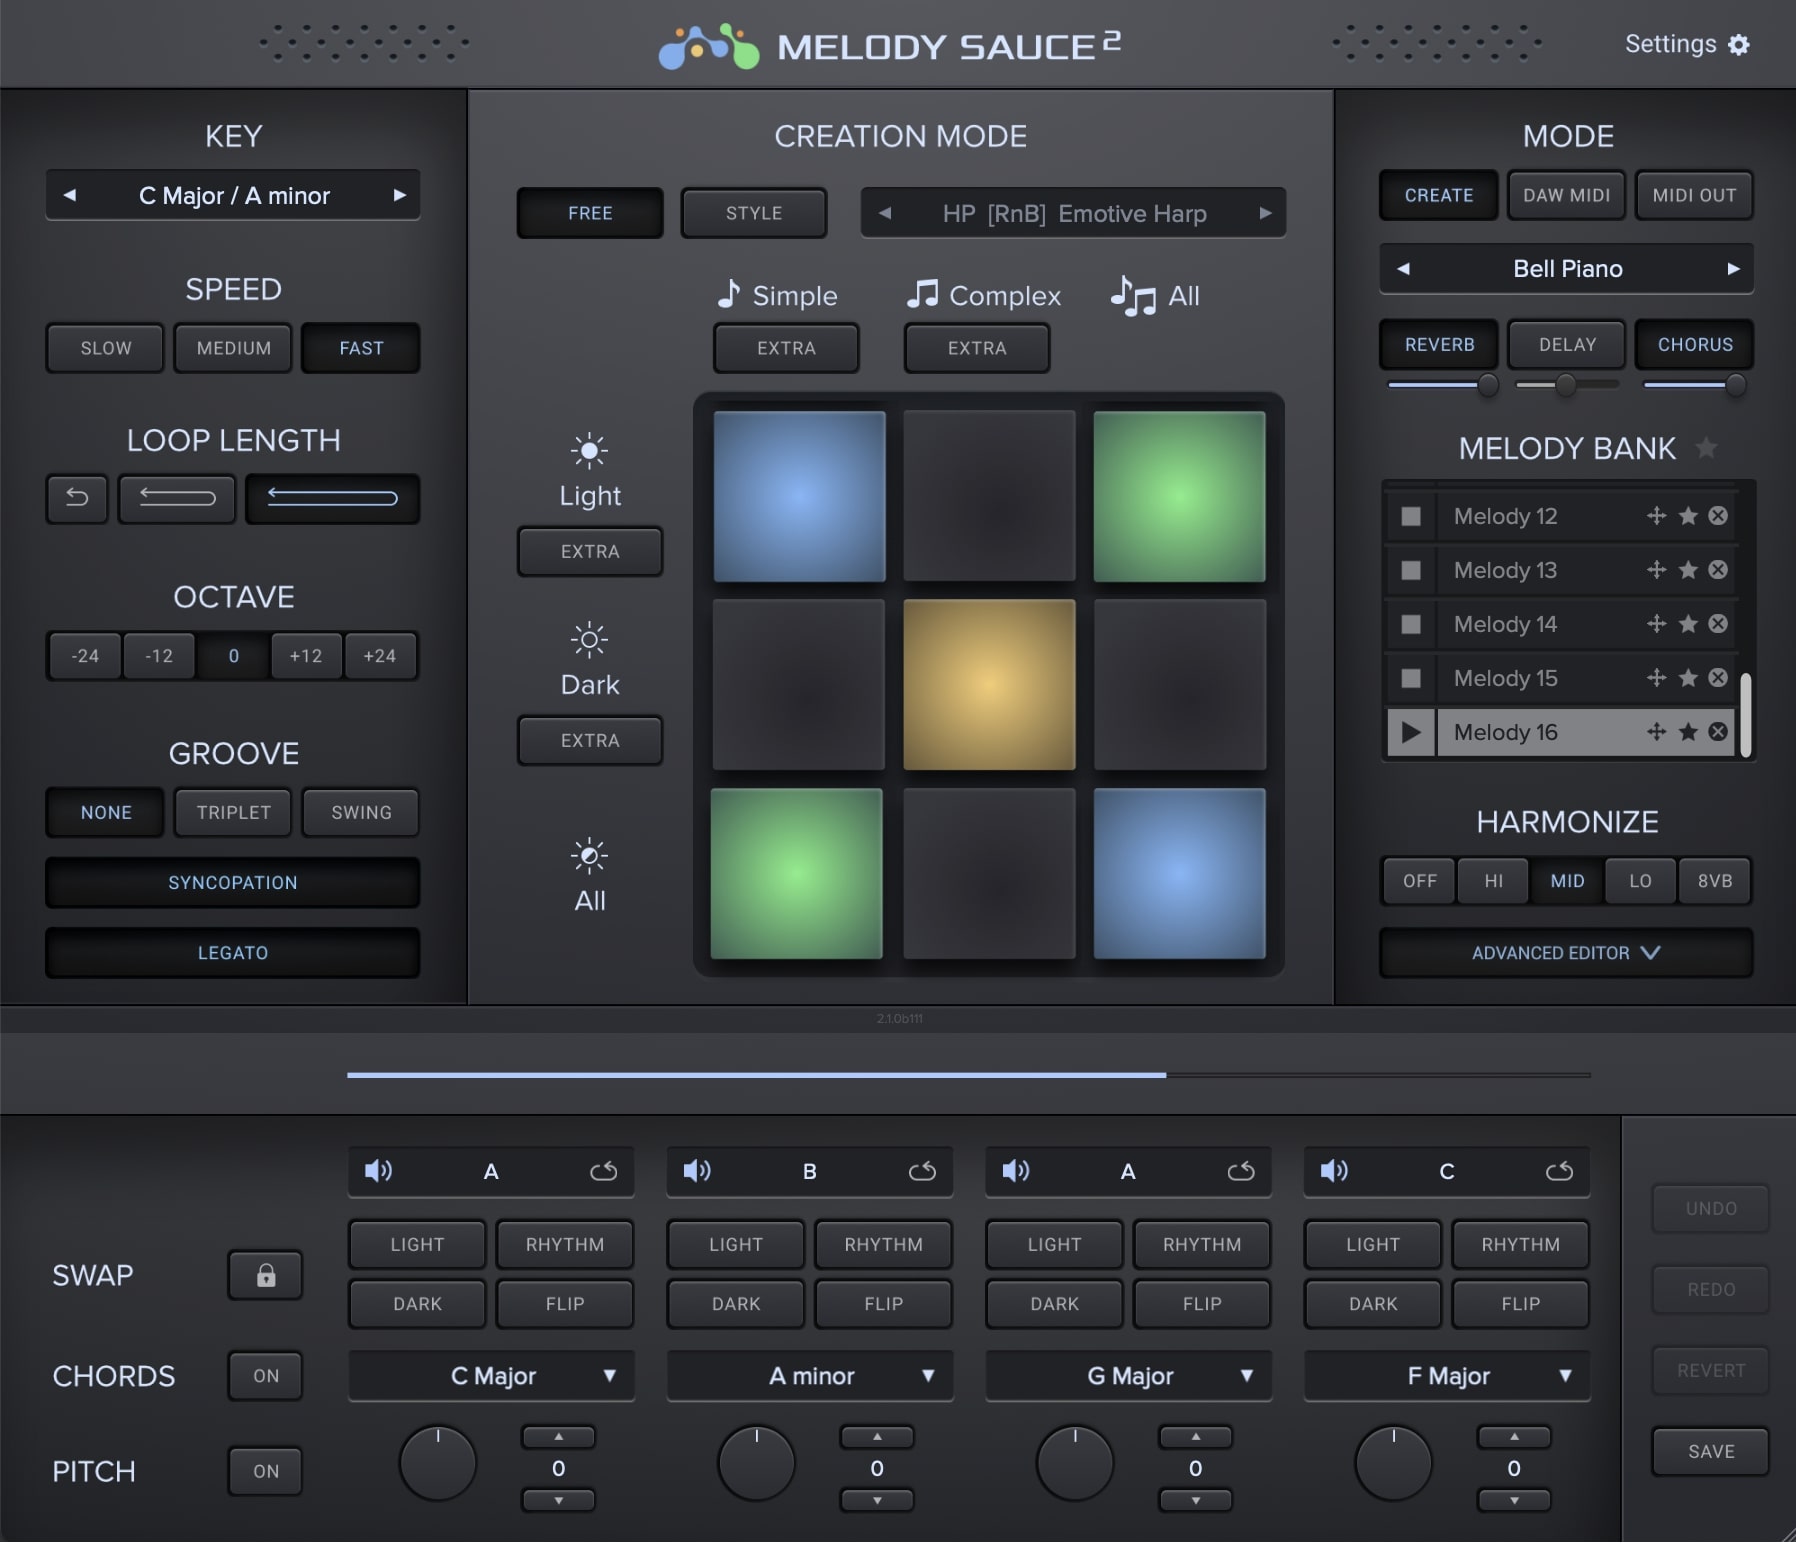 EVAbeat Melody Sauce 2